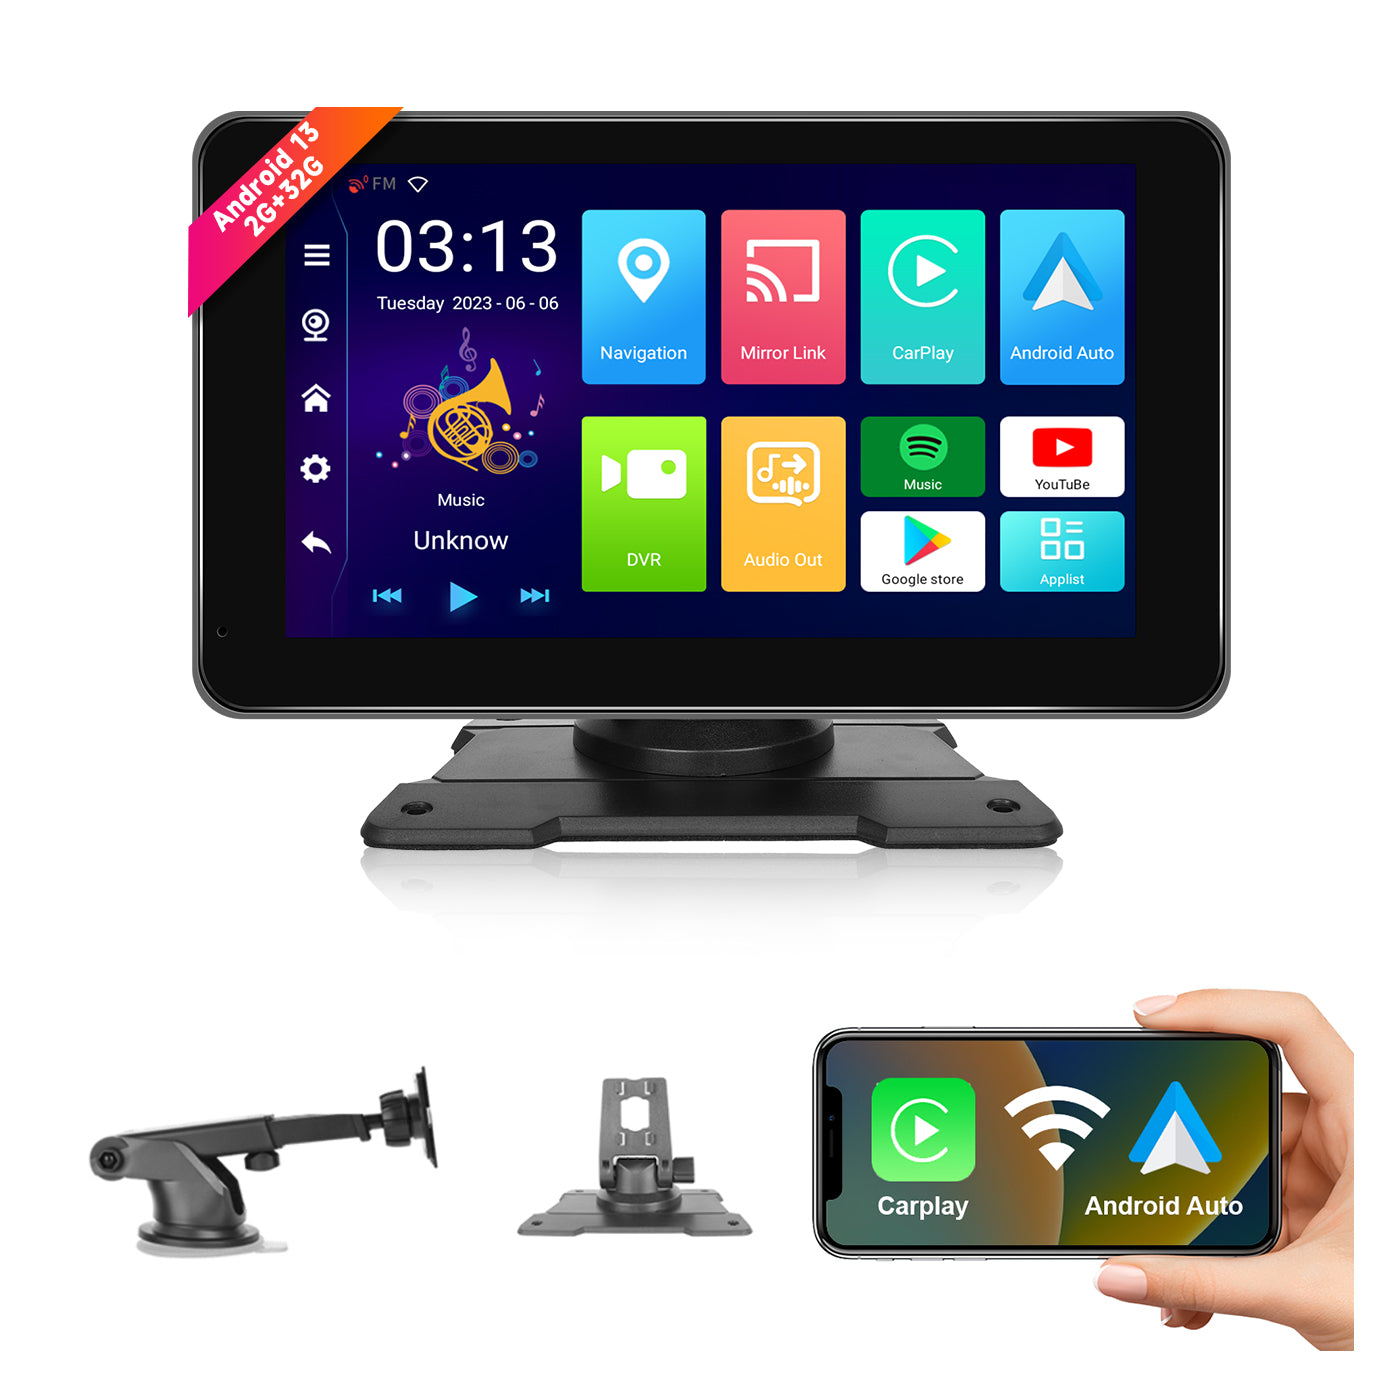 Stereo Multimedia 10 para C4 Lounge 2015 al 2019 con GPS - WiFi - Mirror  Link para Android/Iphone